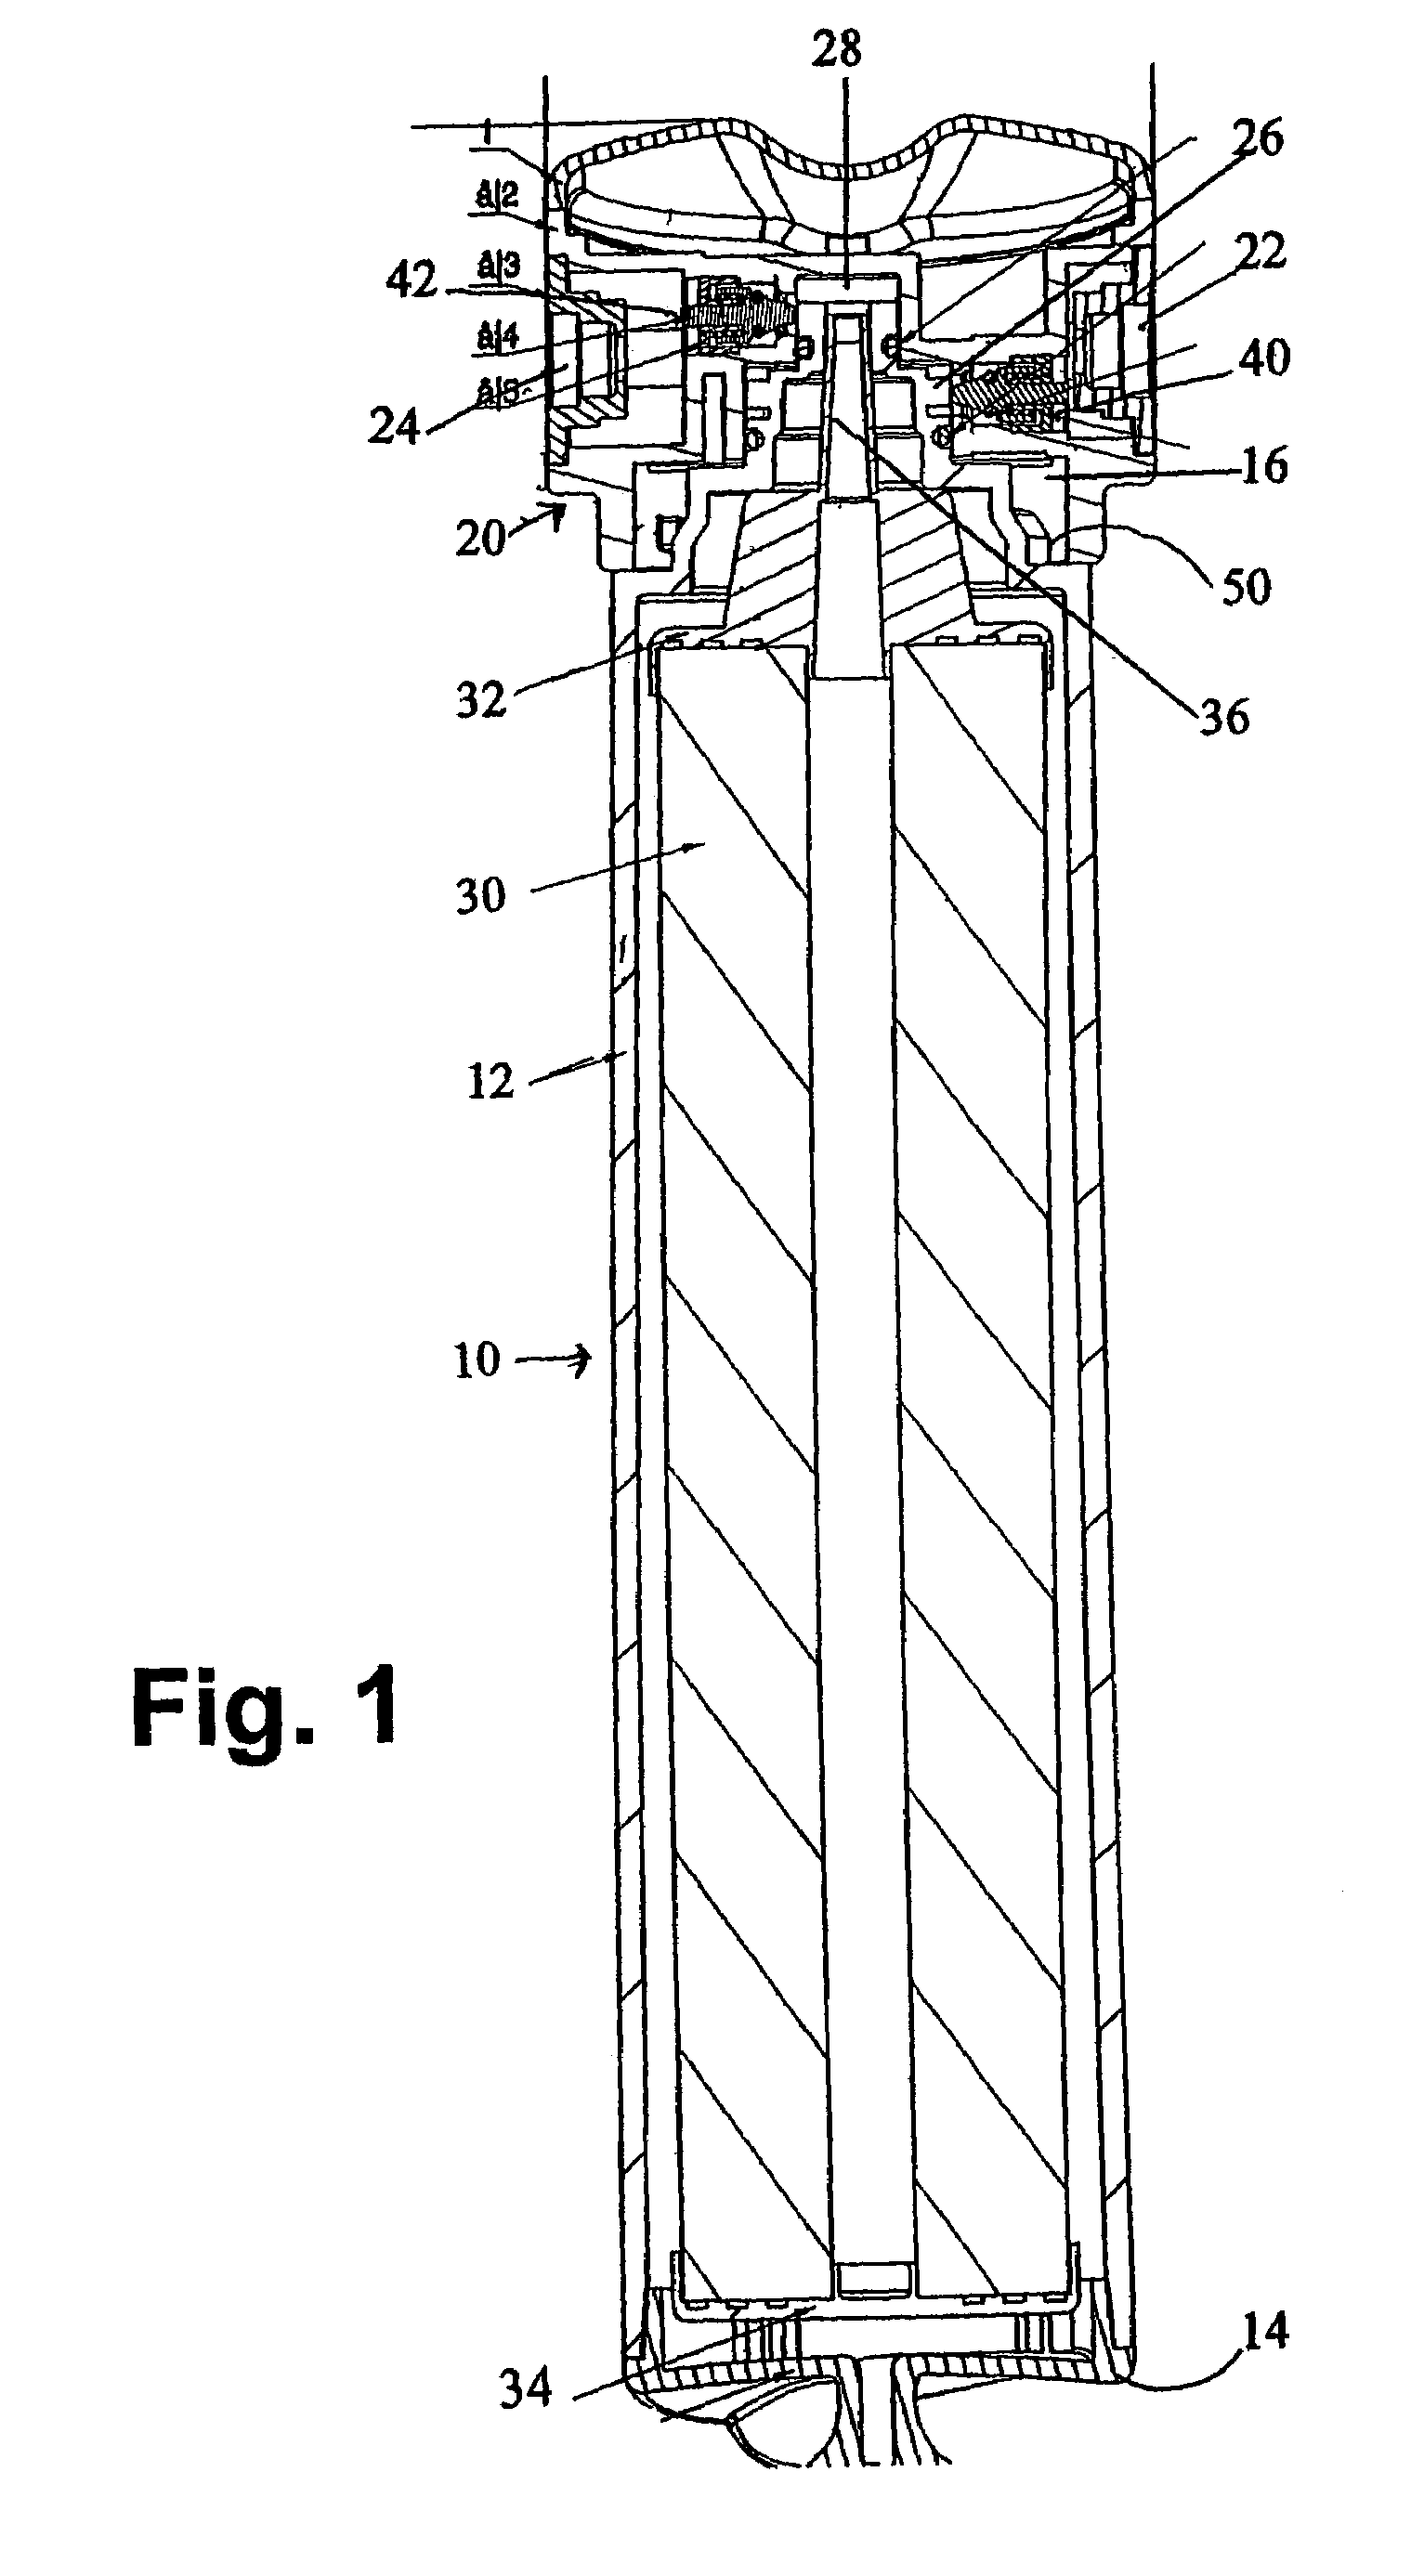 Fluid filter apparatus and method